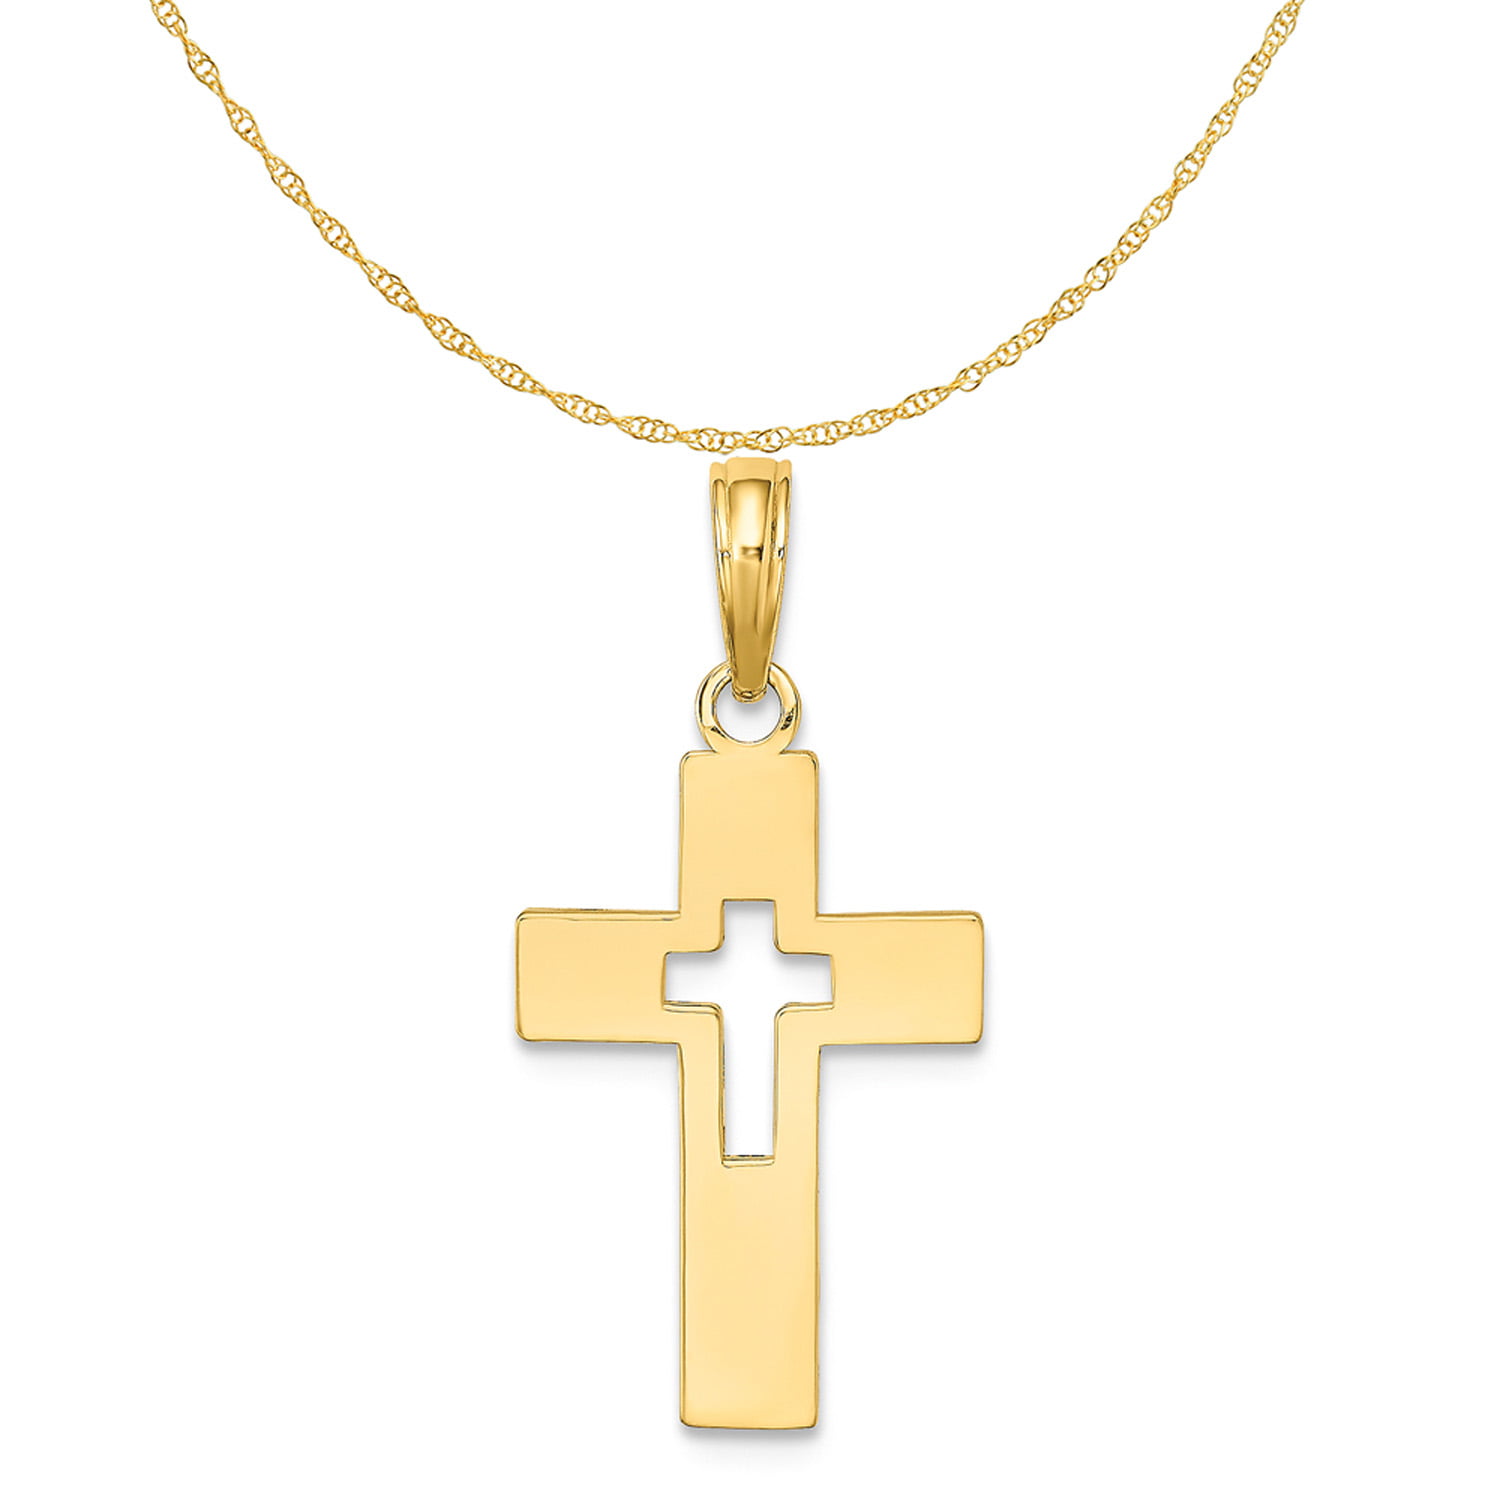 Carat in Karats 14K Yellow Gold Polished Cut-Out Cross Pendant